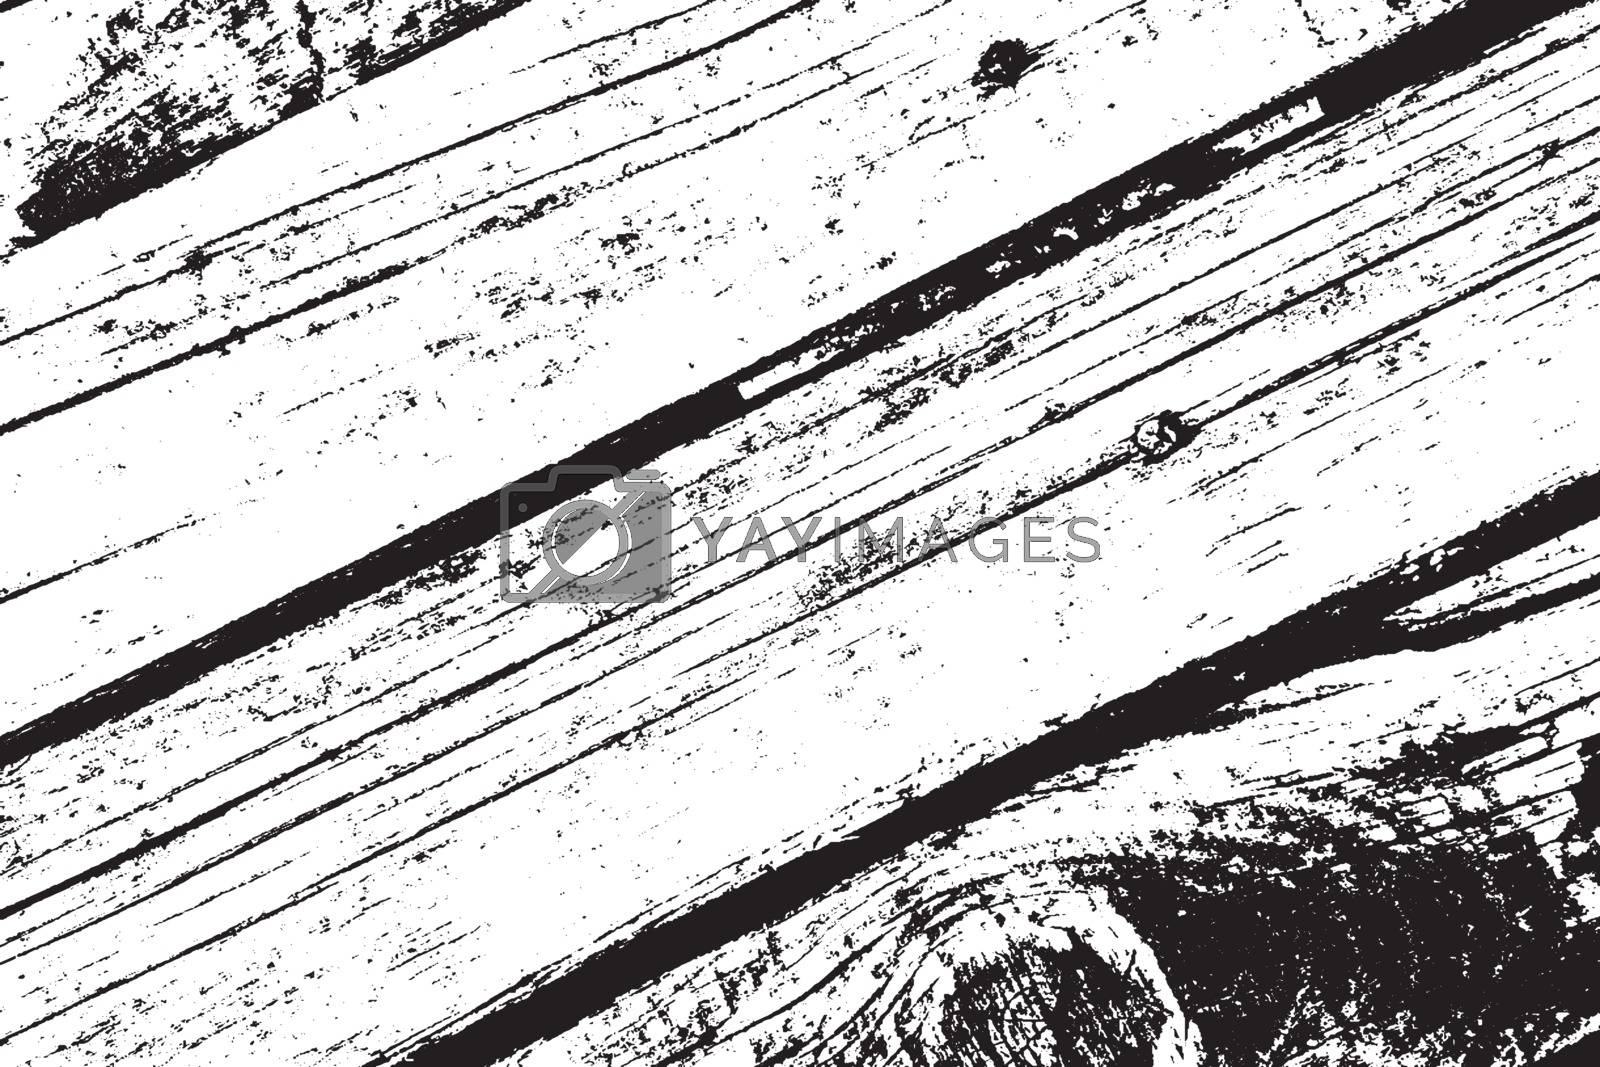 Royalty free image of Wooden Overlay Texture by benjaminlion